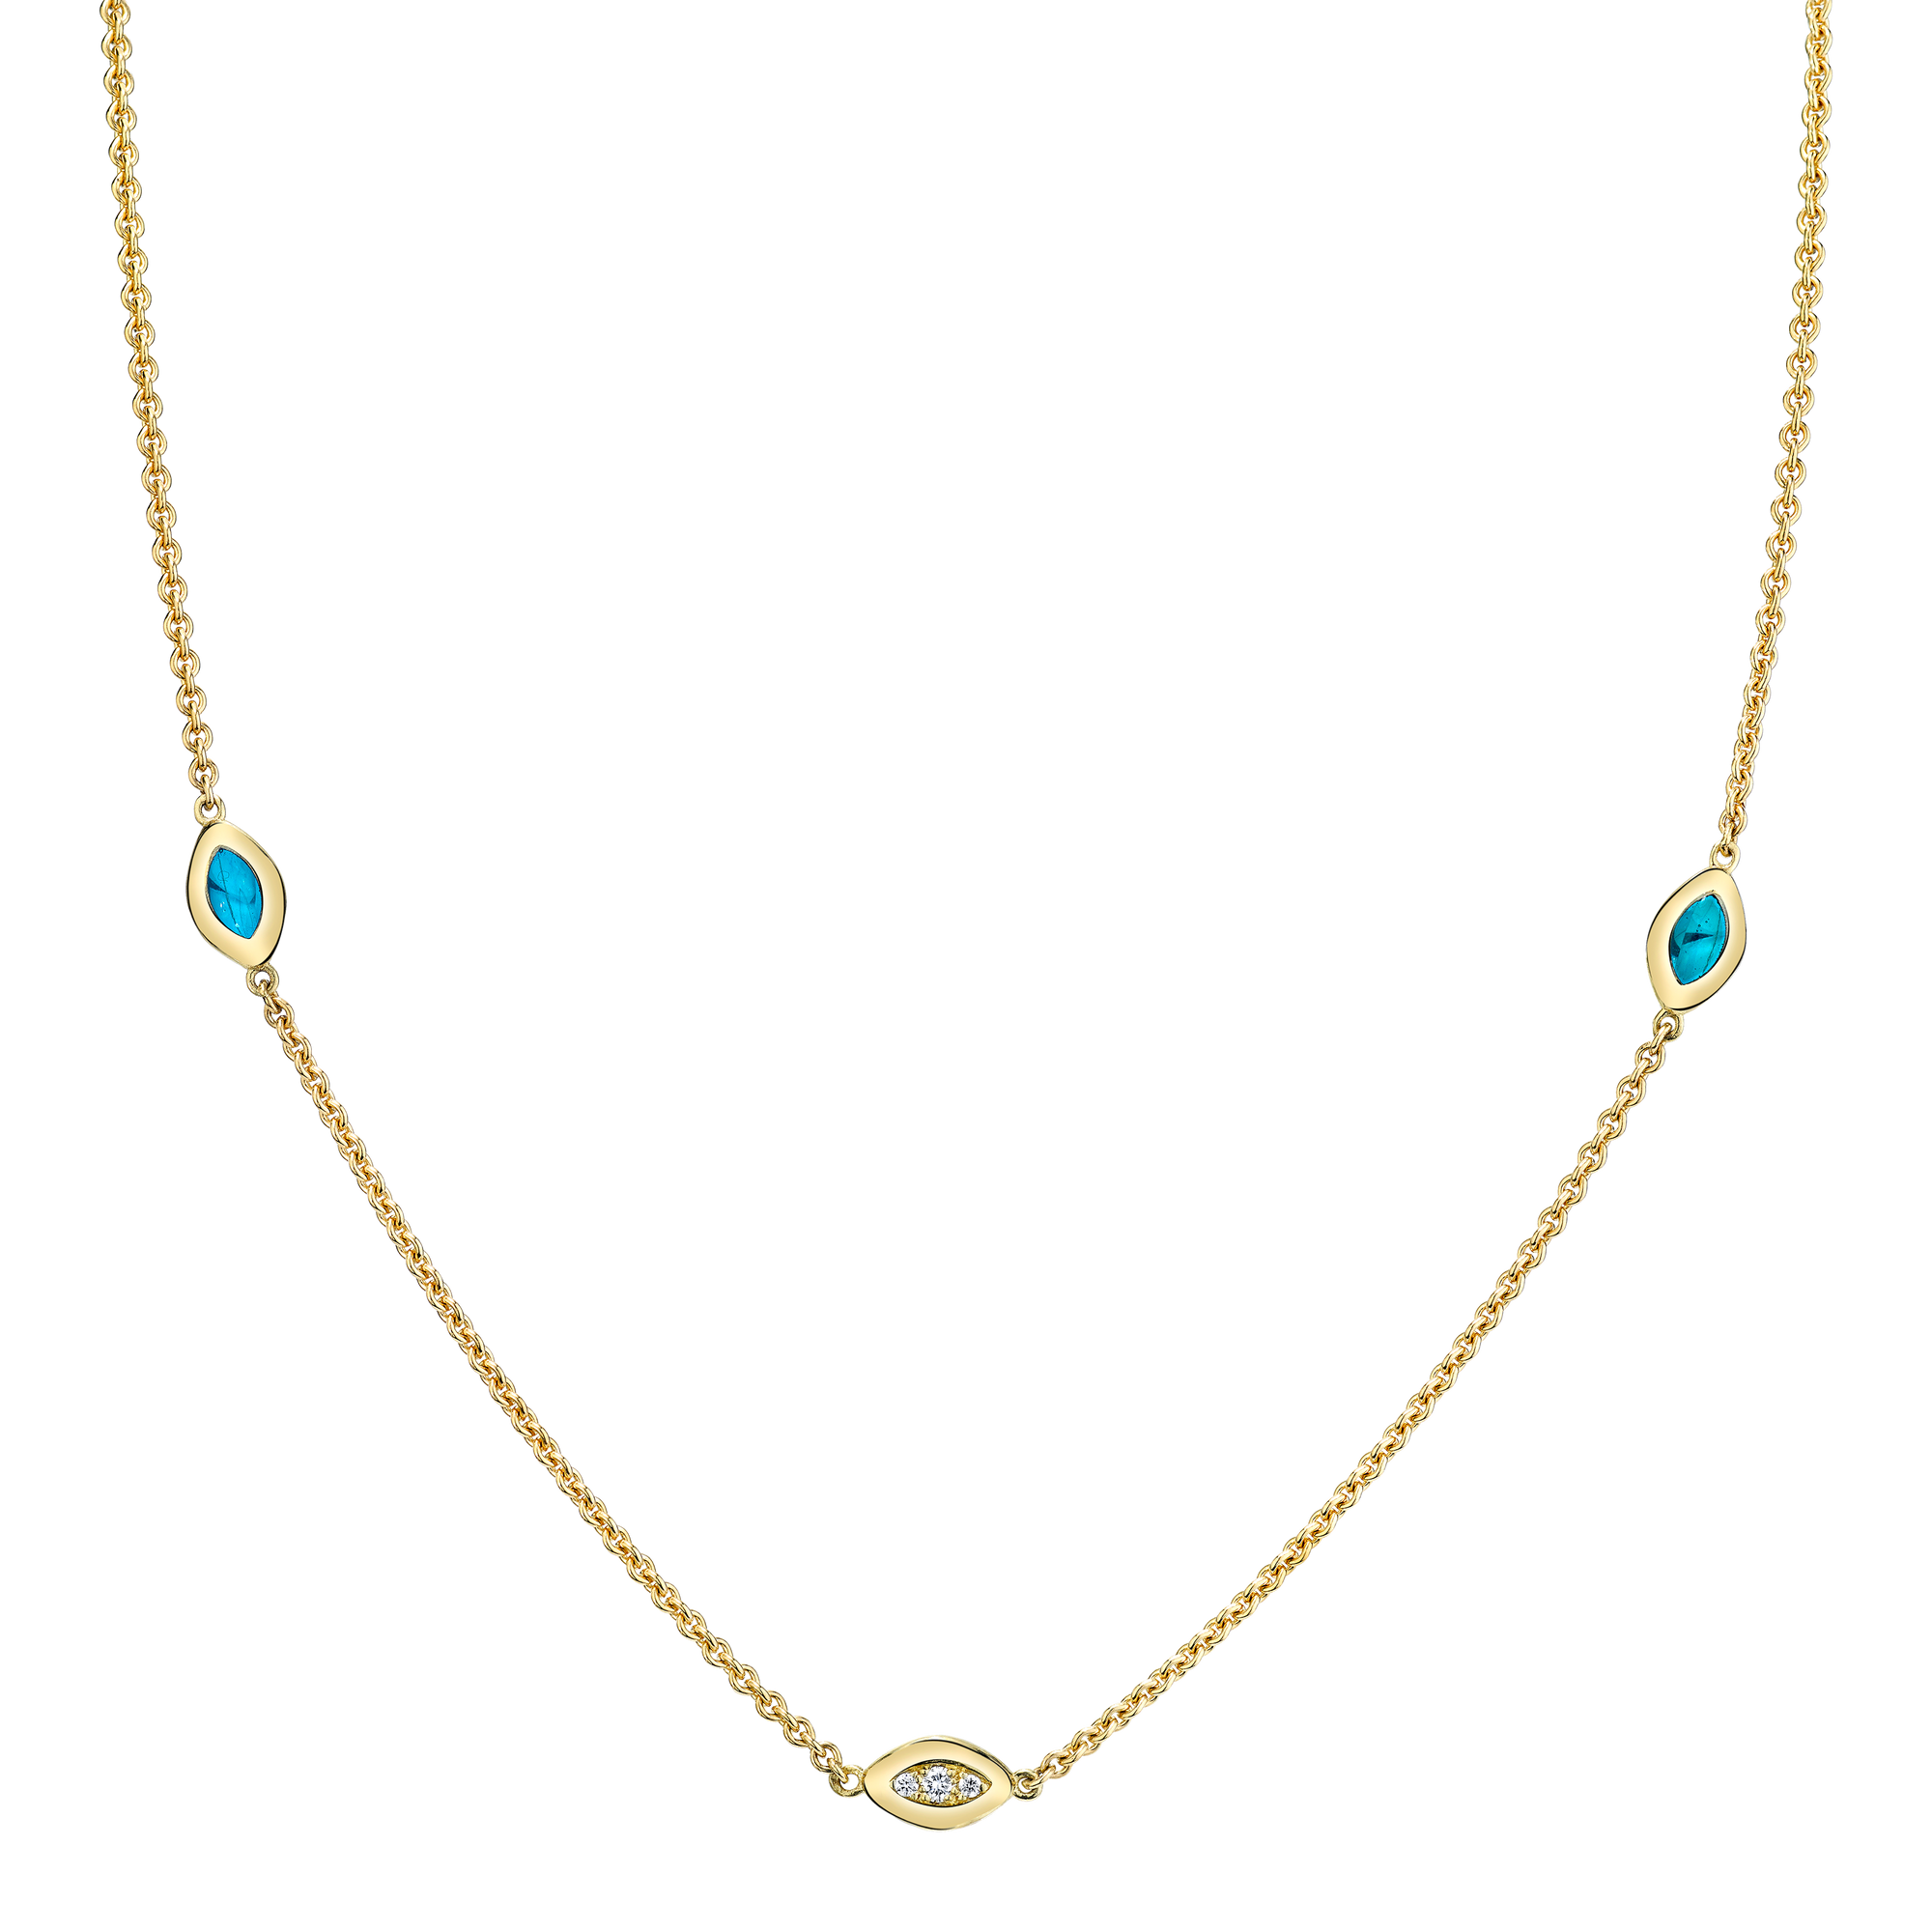 Three Link Italian Gold Necklace with Light Blue Enamel and Diamond Pave